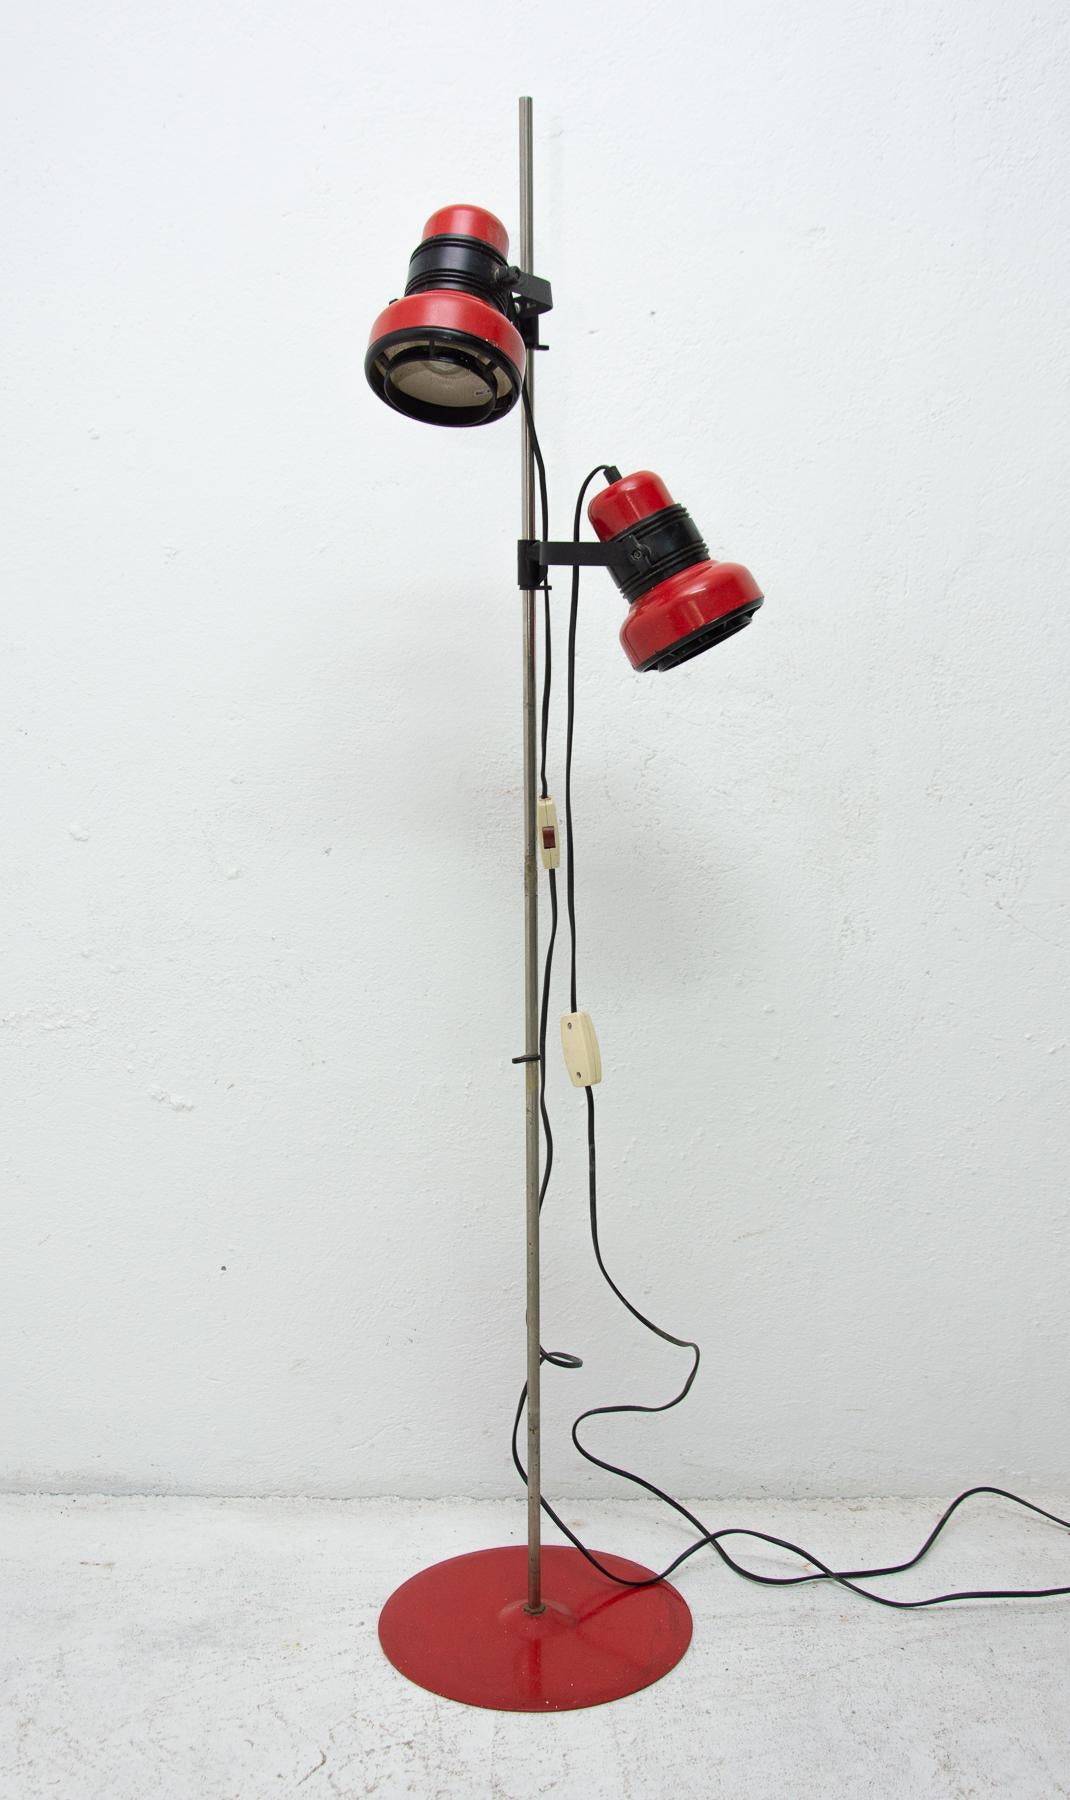 Country Vintage Floor Lamp or Spolitlight, 1960s-1970s, Hungary